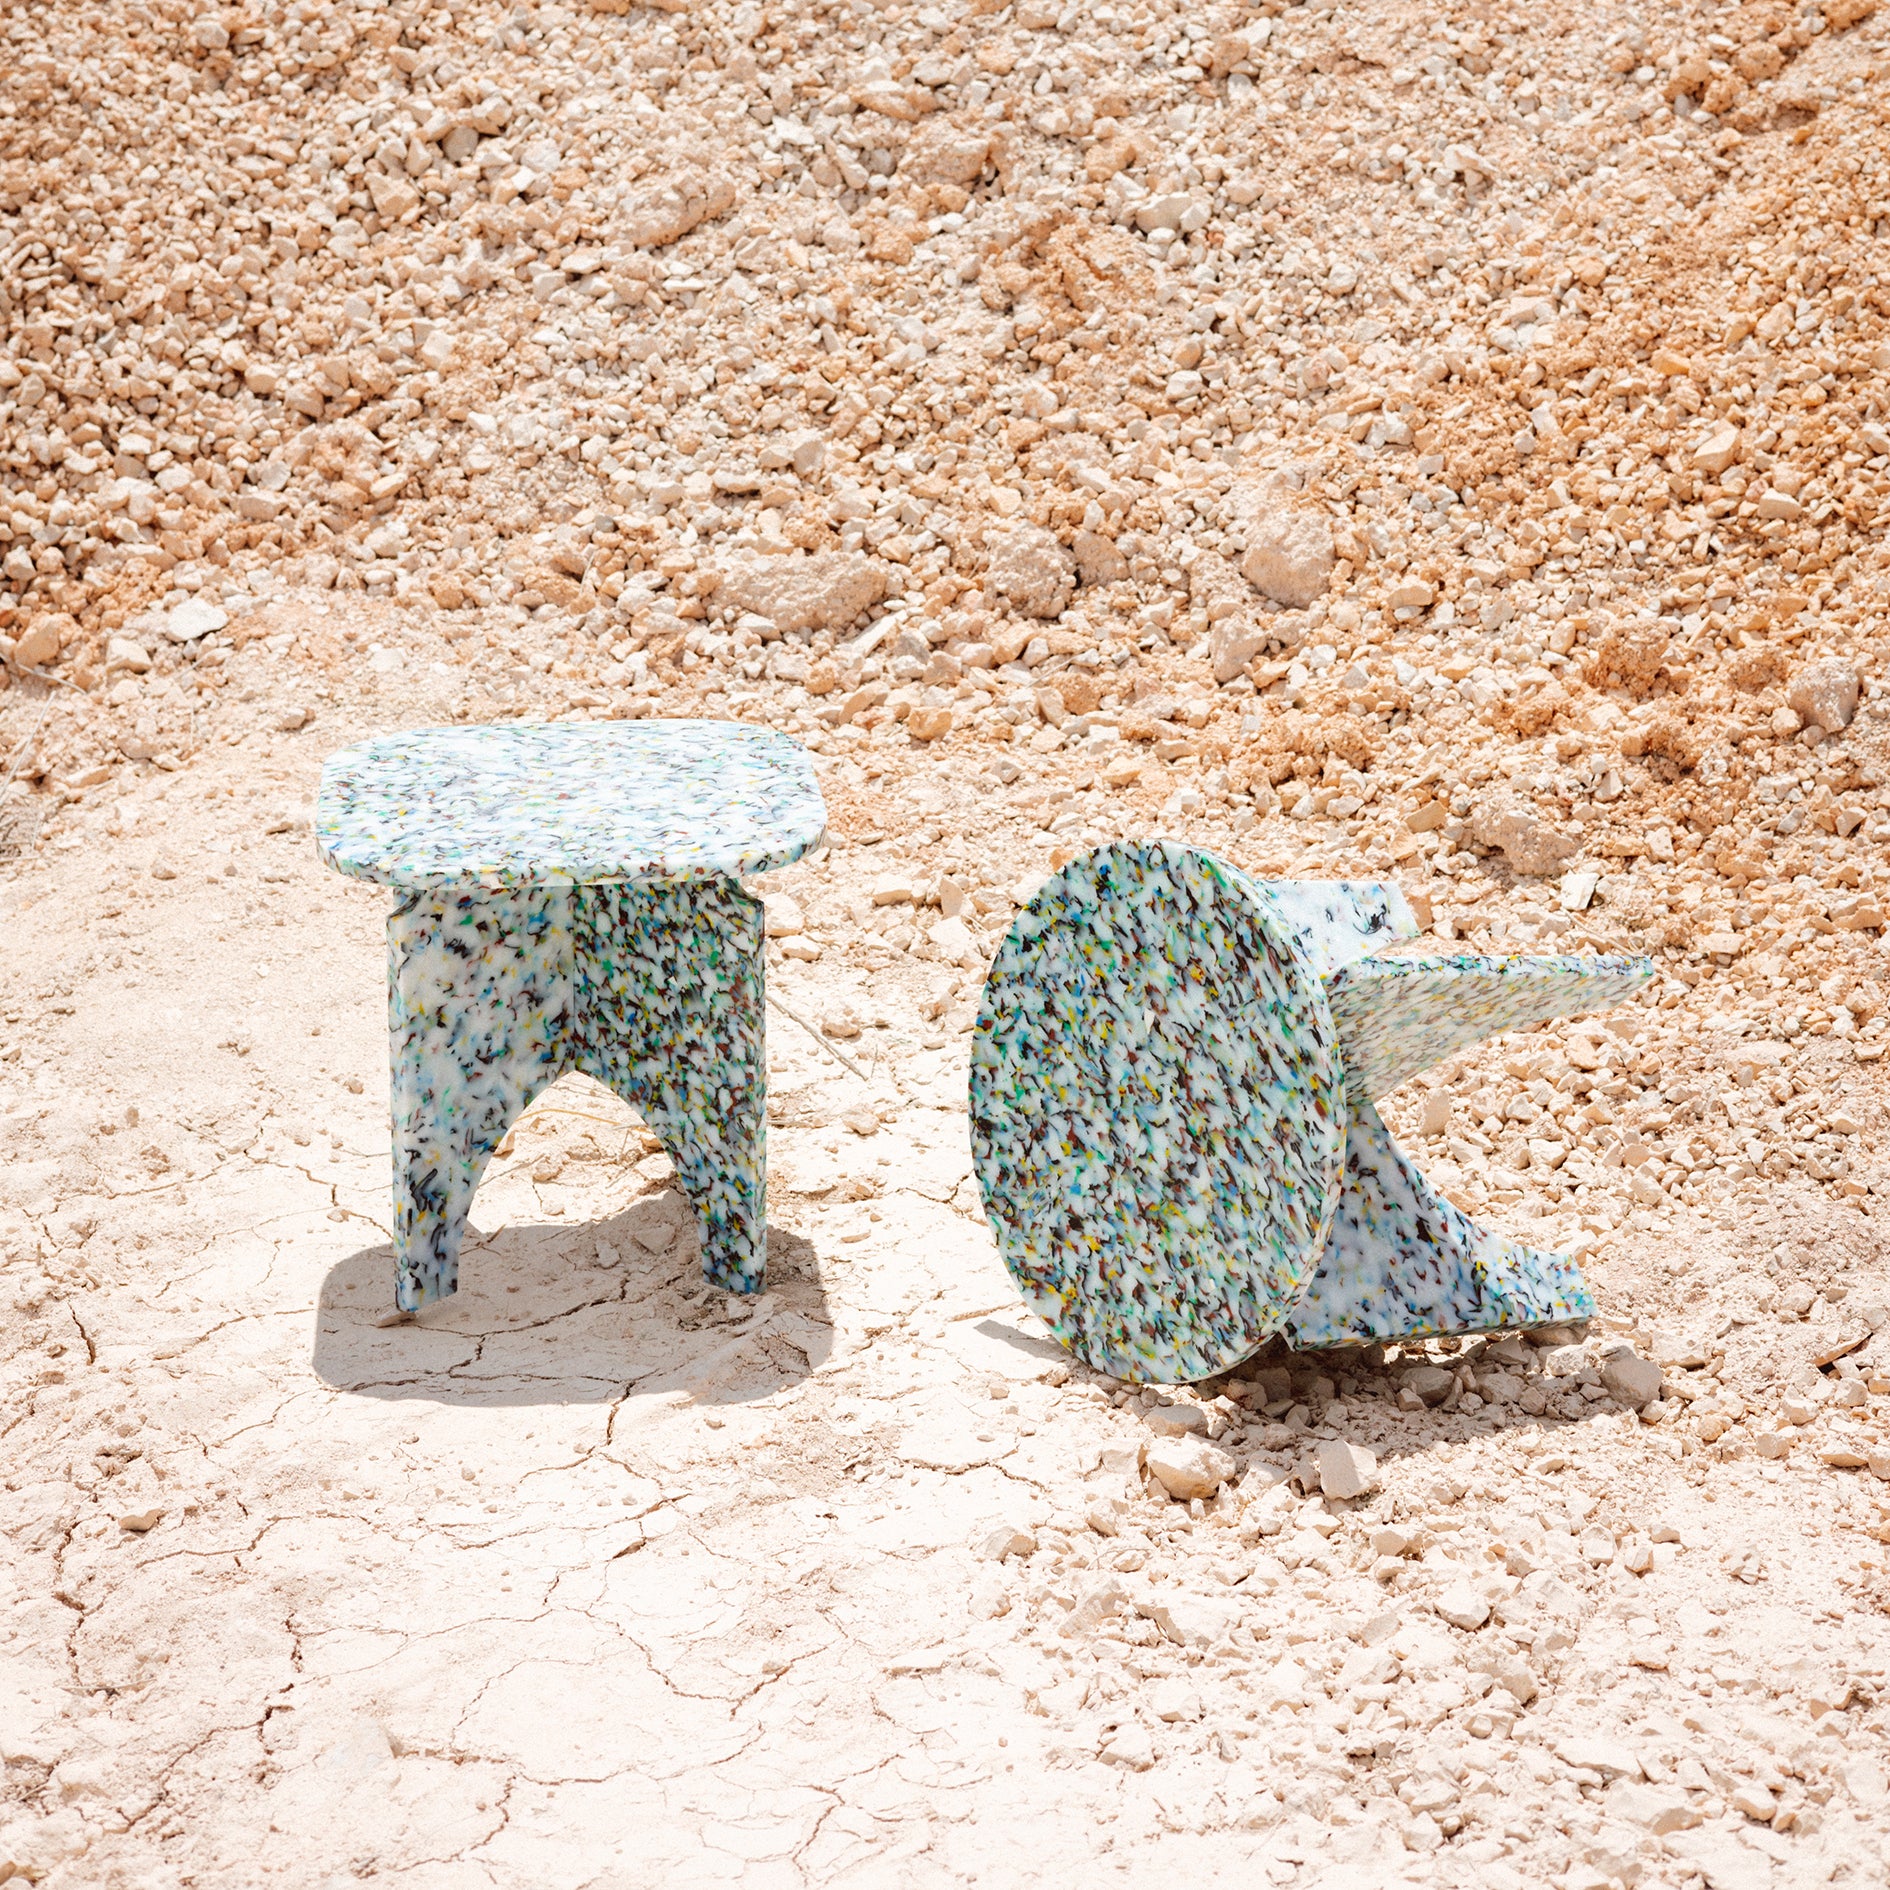 TWO COLOURFUL STOOLS BY THE MINIMONO PROJECT - BRAND FOR ECO FRIENDLY - PLAYFUL - MULTI FUNCTIONAL - SUSTAINABLE - HIGH QUALITY - DESIGN FURNITURE FROM RECYCLED PLASTIC FOR BOTH ADULT AND CHILDREN MADE IN BERLIN GERMANY